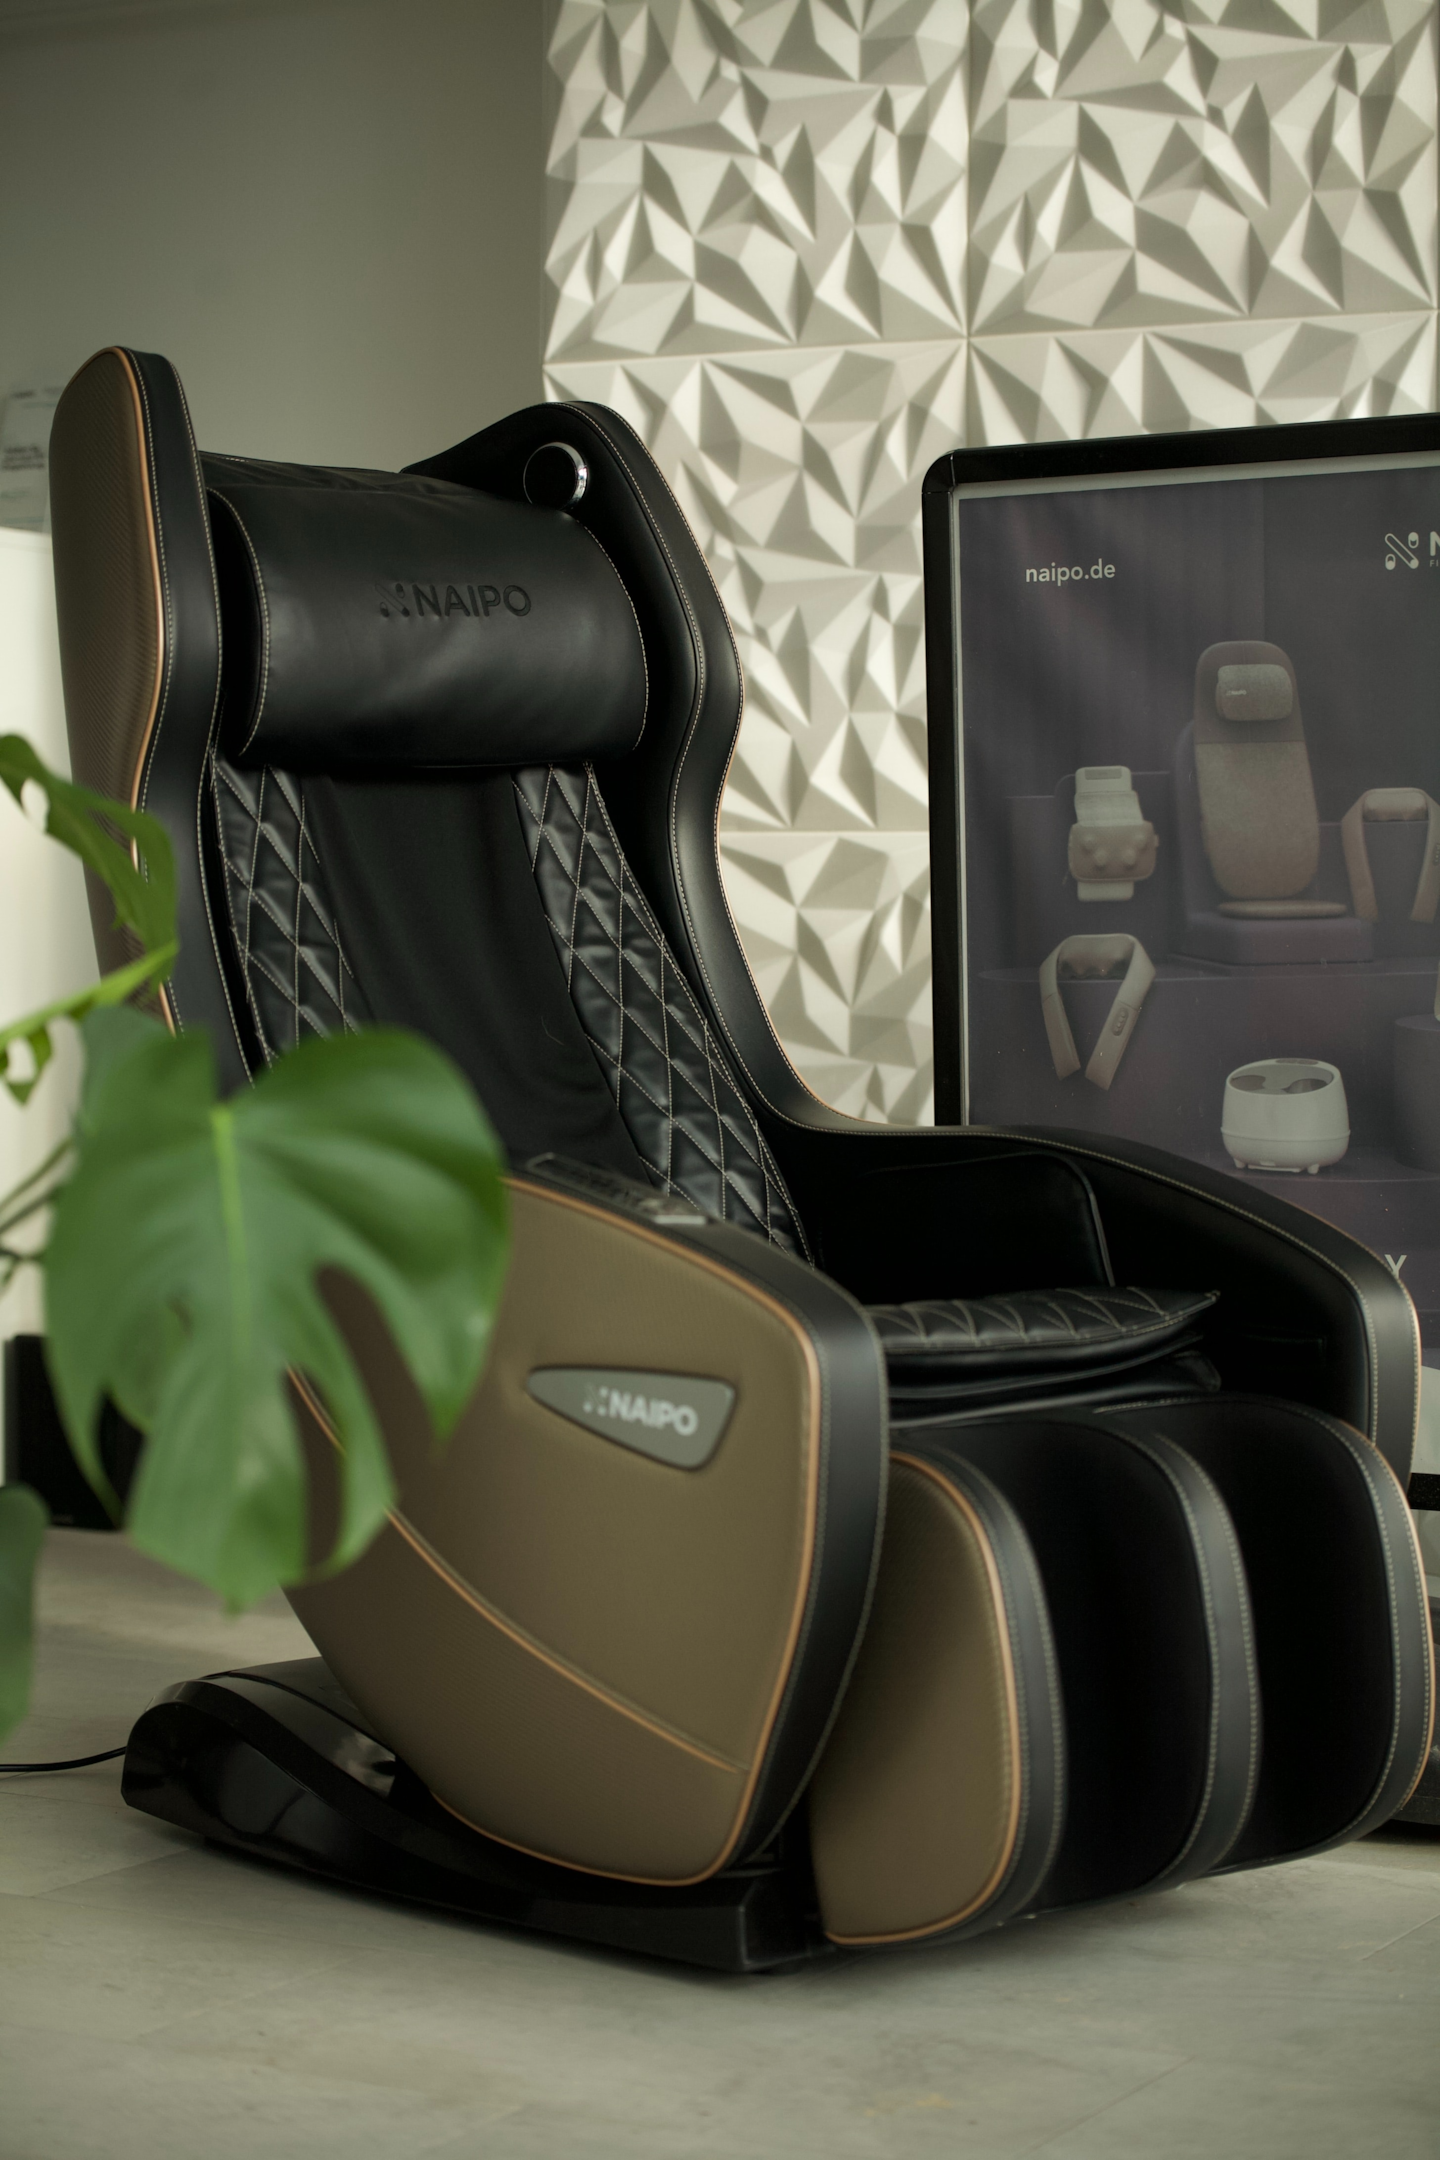 An image of a massage chair in the living room